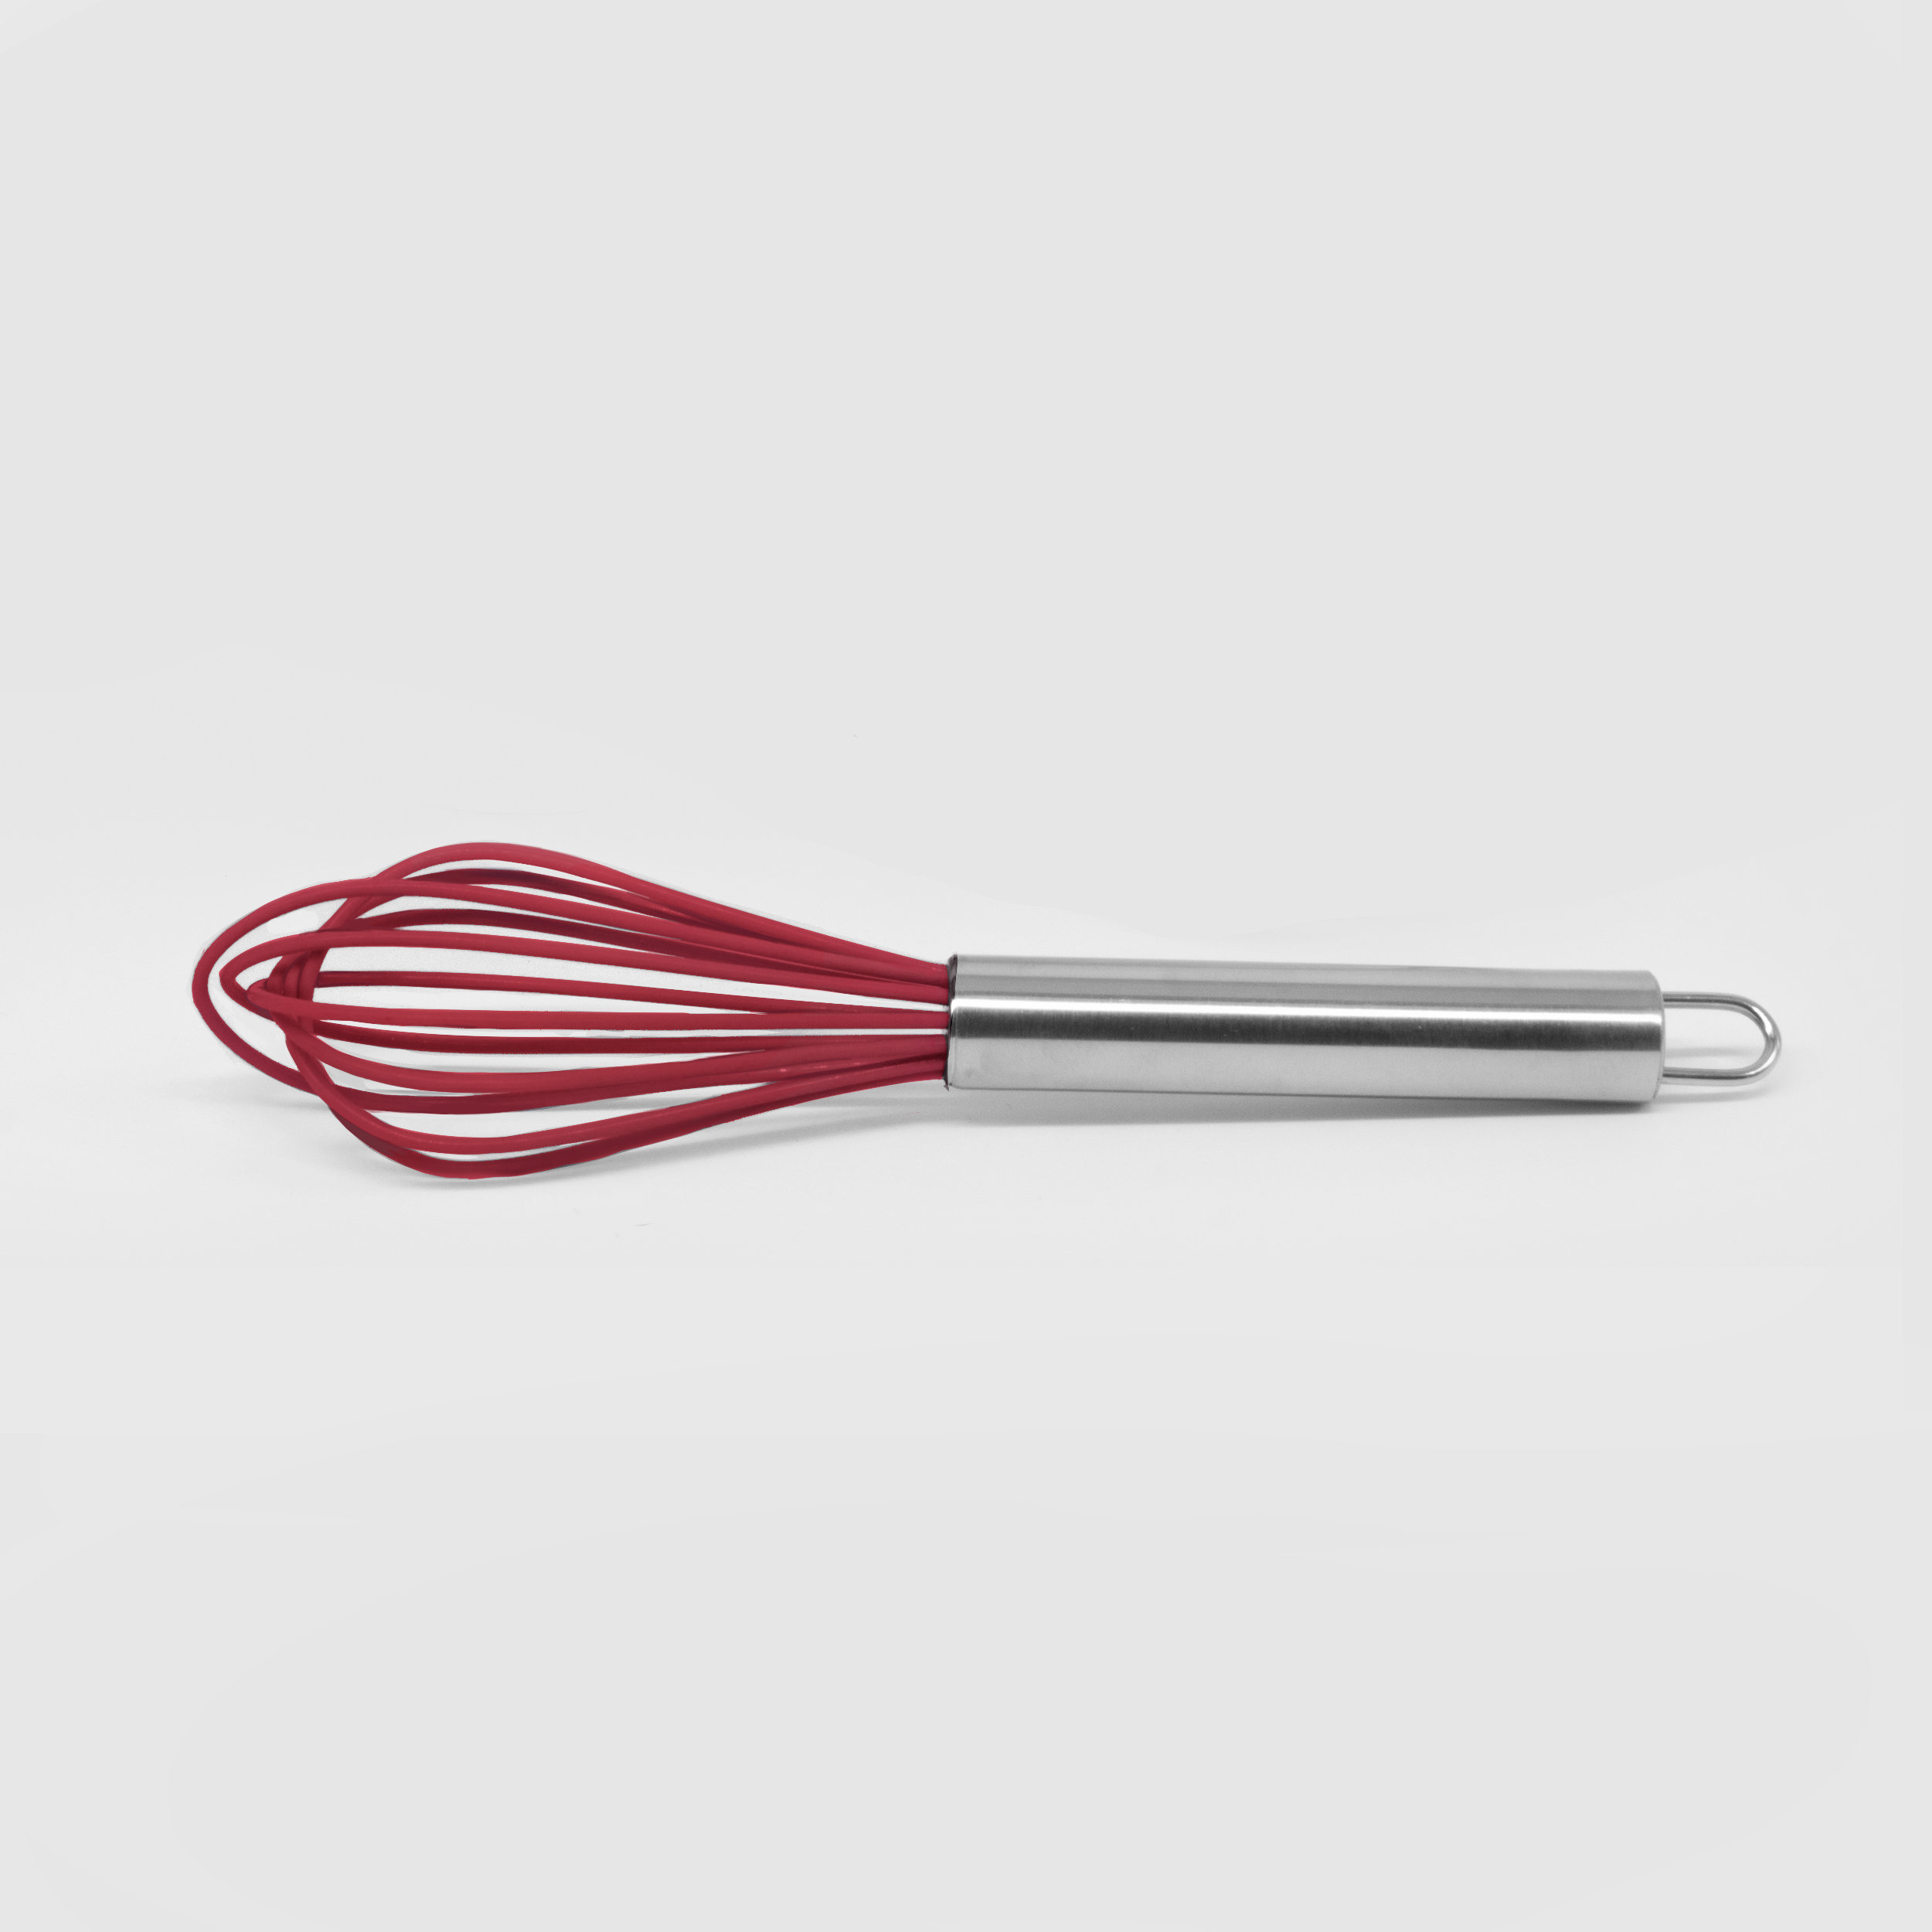  OXO Good Grips 9-Inch Silicone Whisk - Red: Silicone